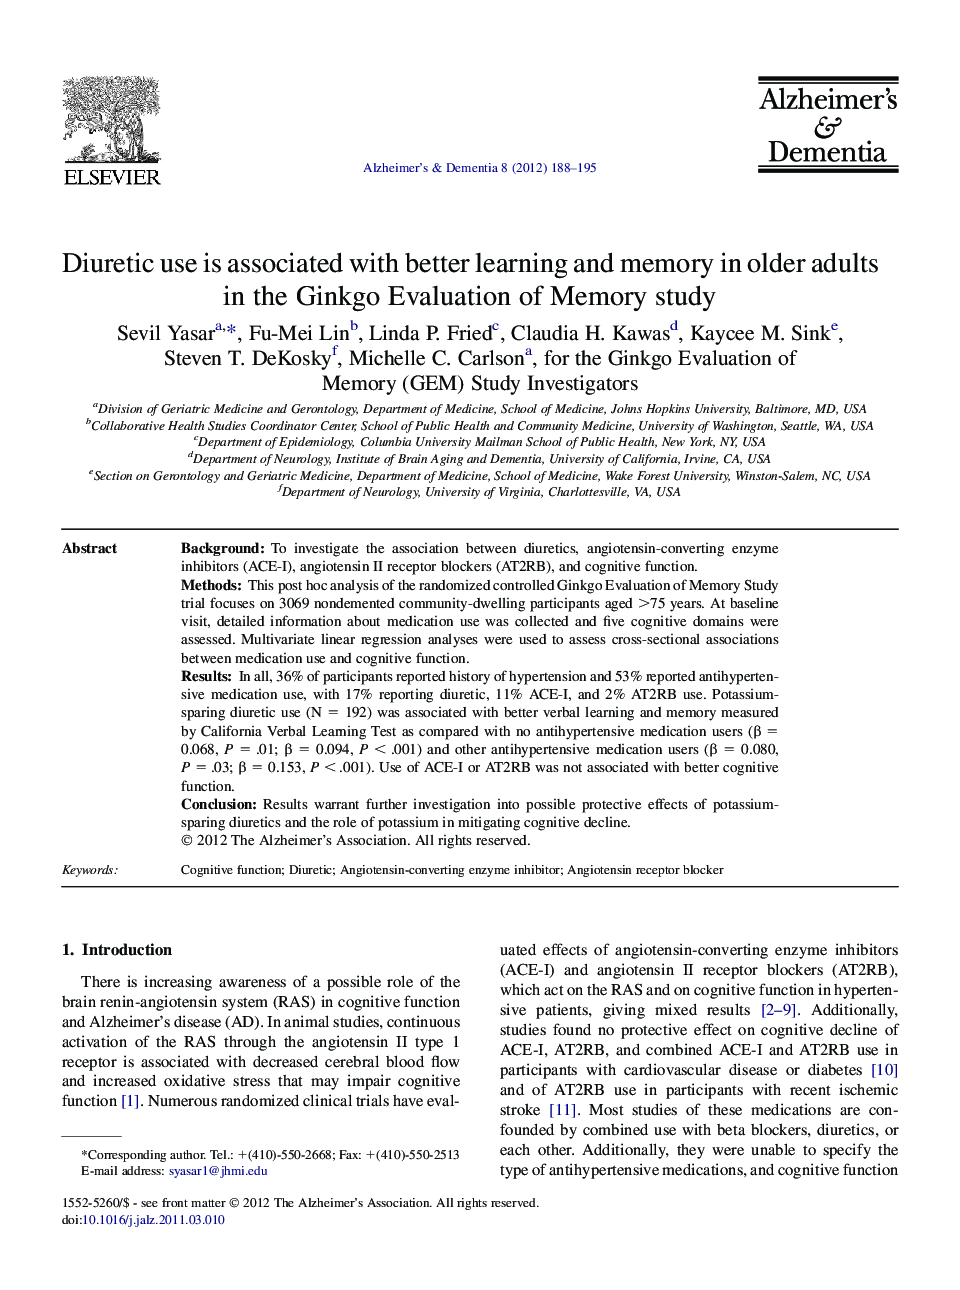 Featured ArticleDiuretic use is associated with better learning and memory in older adults in the Ginkgo Evaluation of Memory study